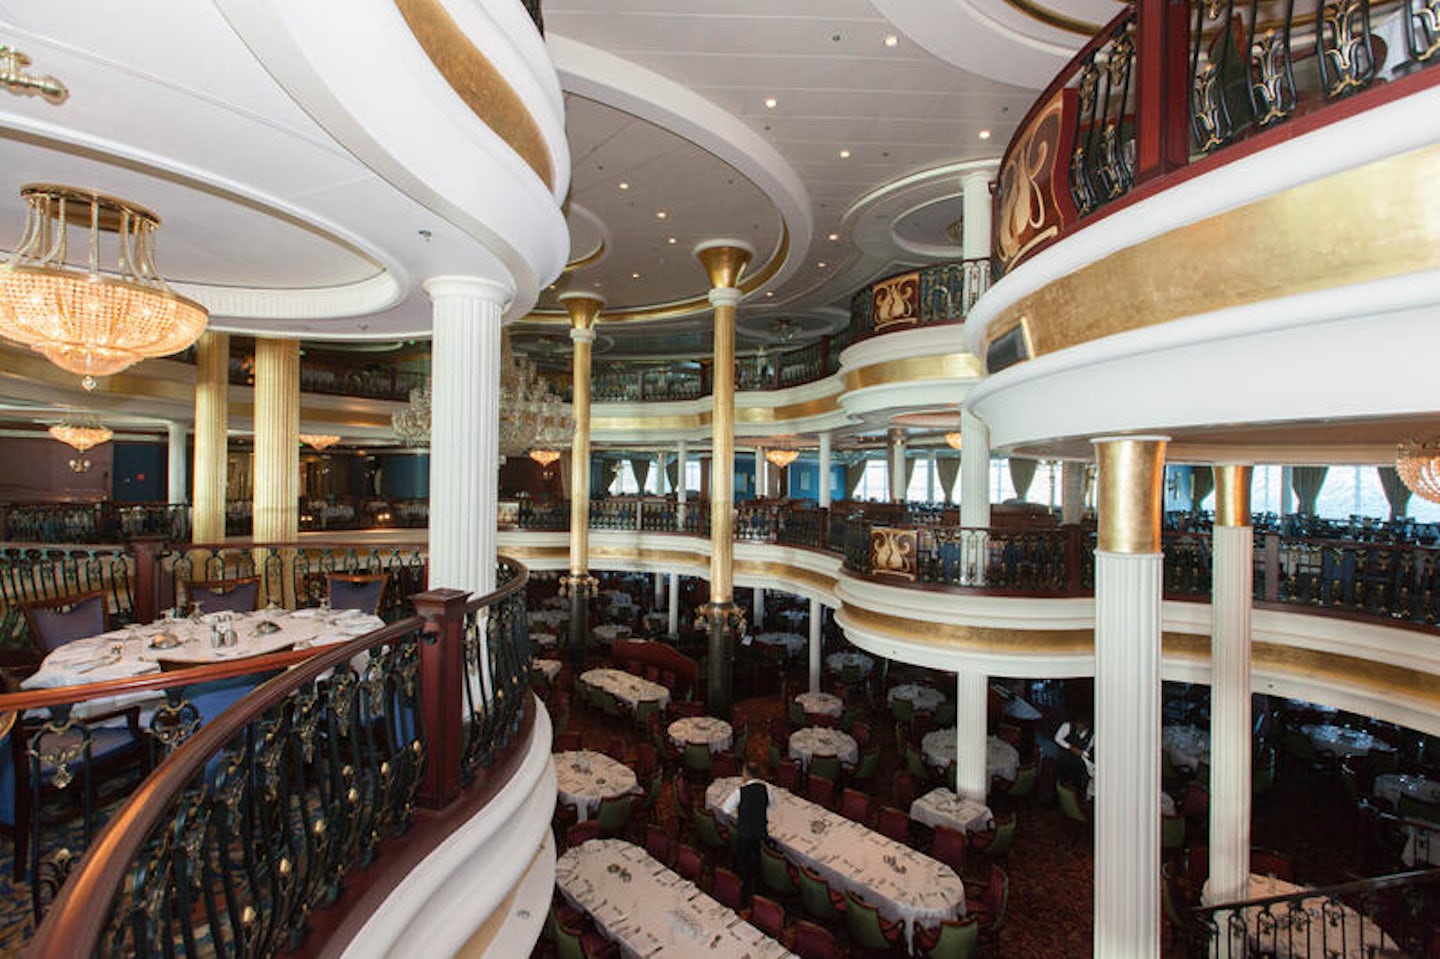 Othello Dining Room on Independence of the Seas